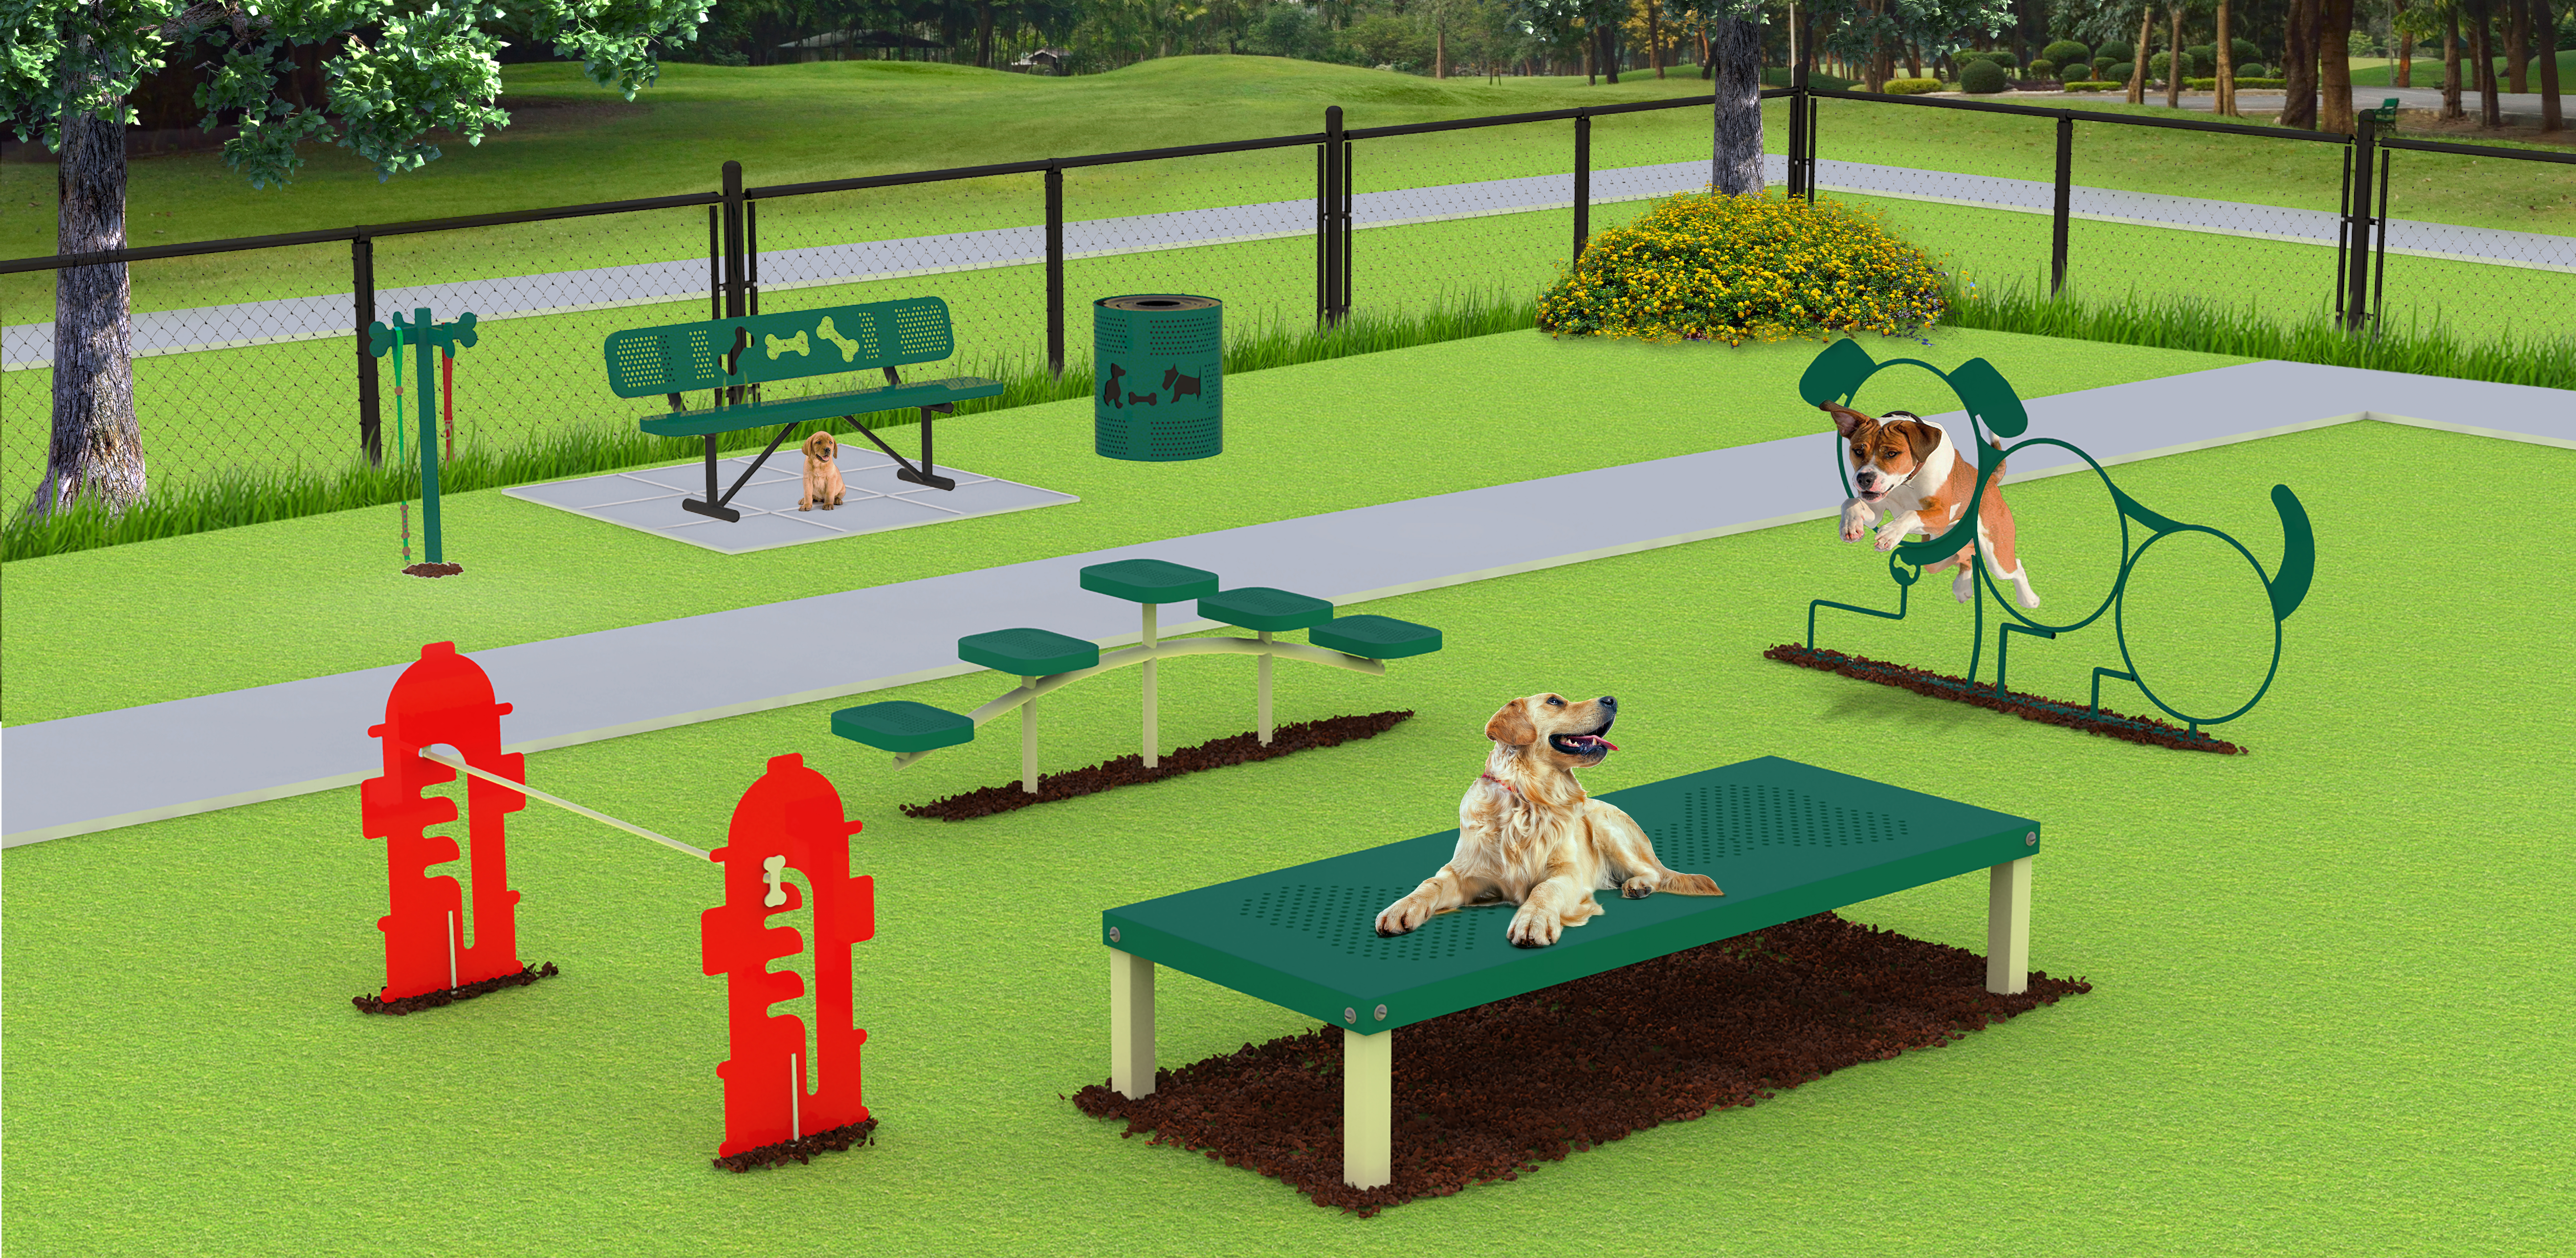 Dog Playground Equipment Essential to Creating a Canine-Friendly and Fun Dog Park